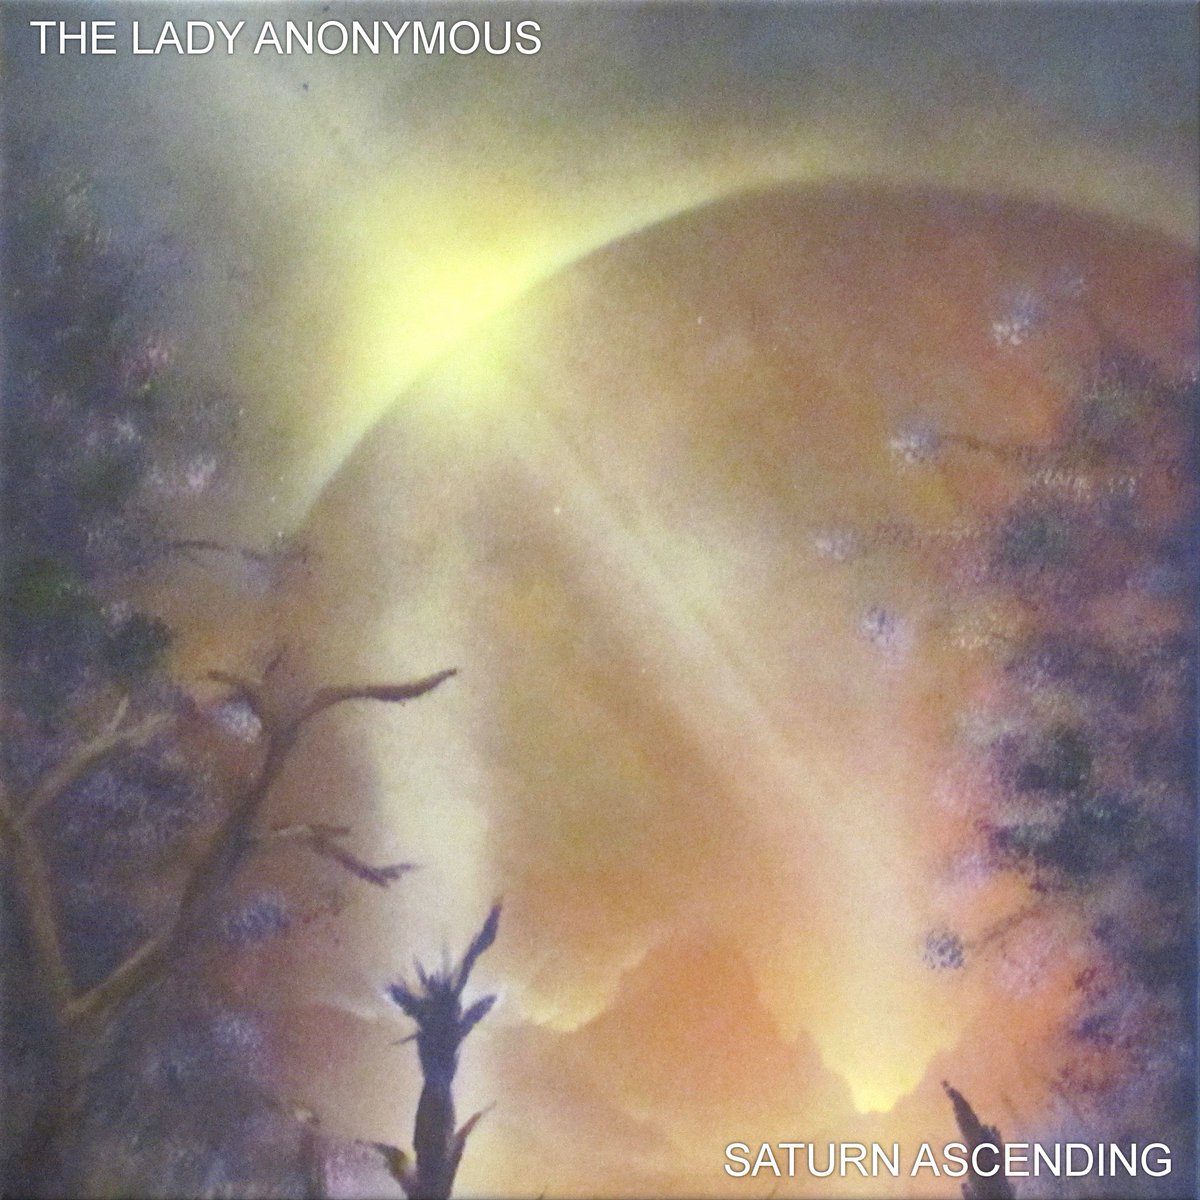 First draft of the cover for upcoming #NewAlbum Saturn Ascending, featuring artwork by @Windswept1111. A shame to crop it or to put text on it at all. But I think's simple and bold at the same time. What do you think? #FineSprayPaintArt